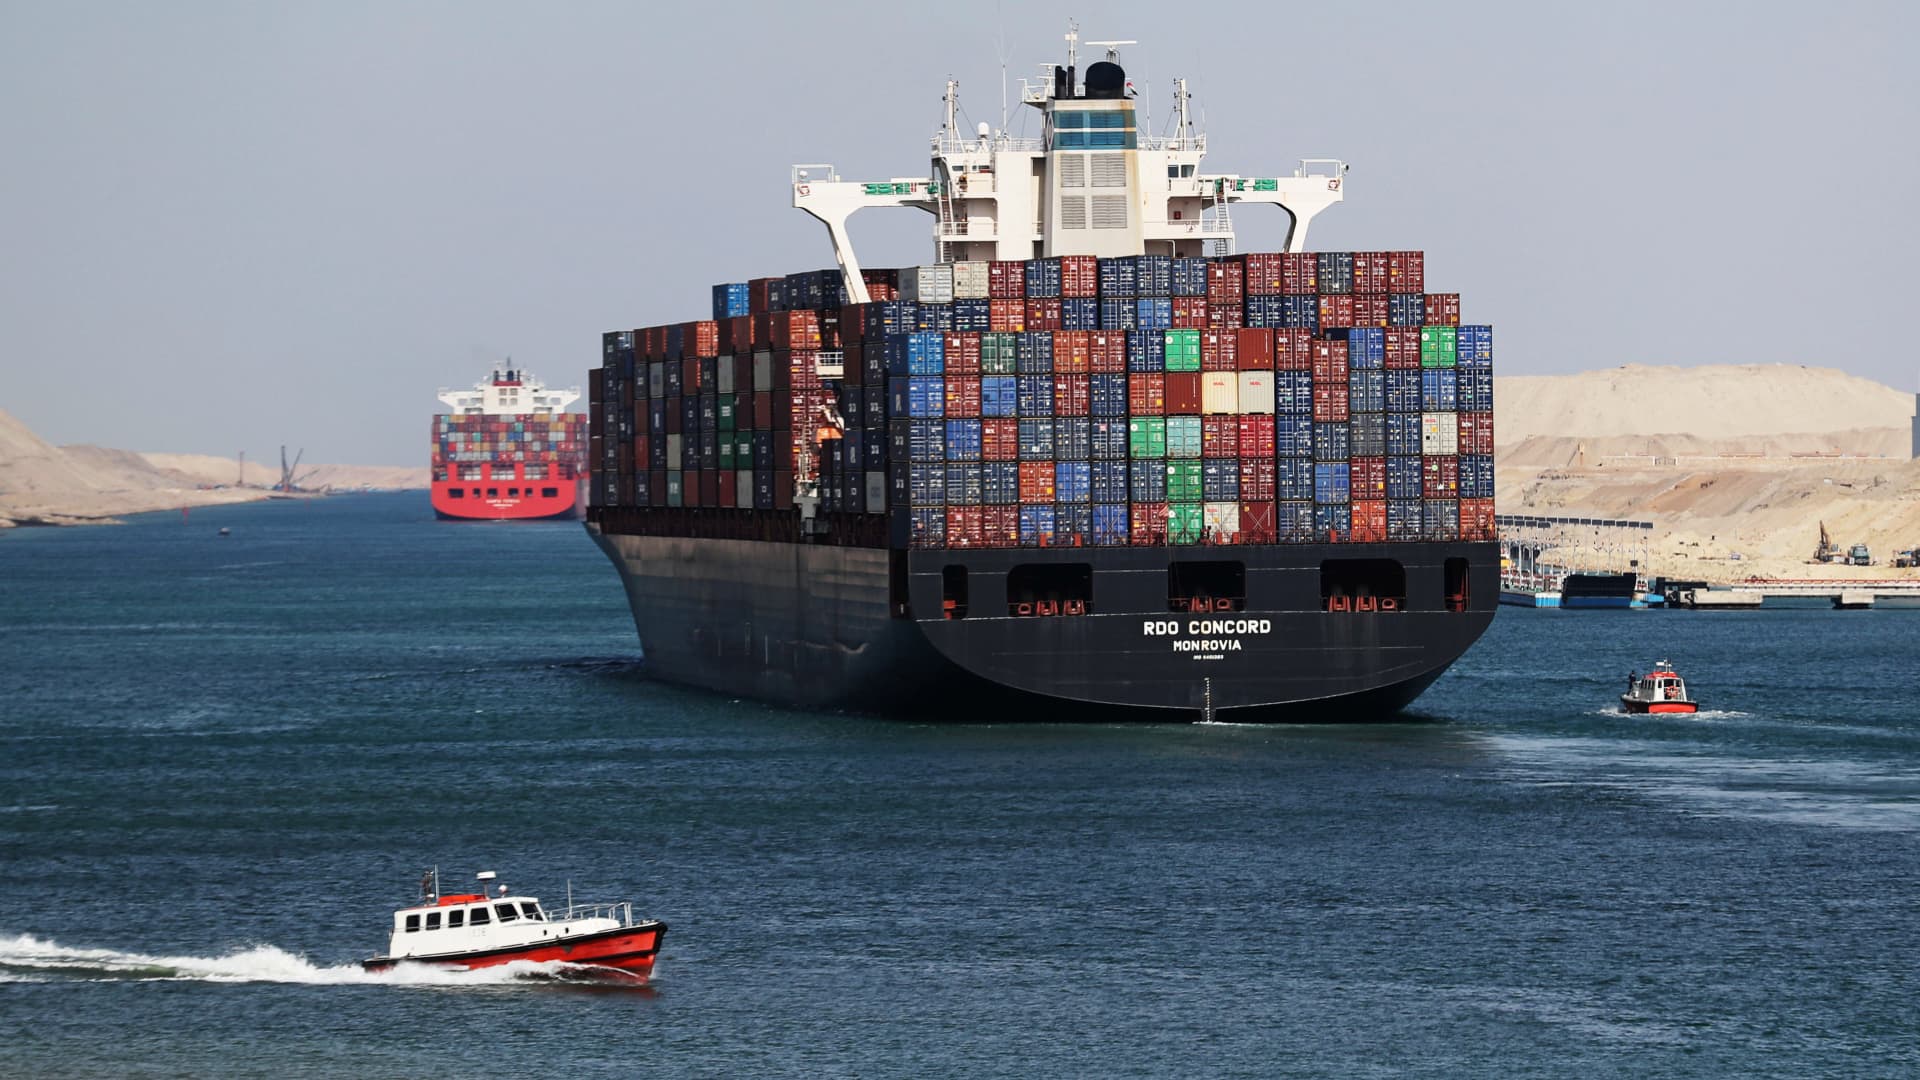 Container ship RDO Concord sails through the Suez Canal as Egypt celebrates the 150th anniversary of the canal opening in Ismailia, Egypt November 17, 2019.